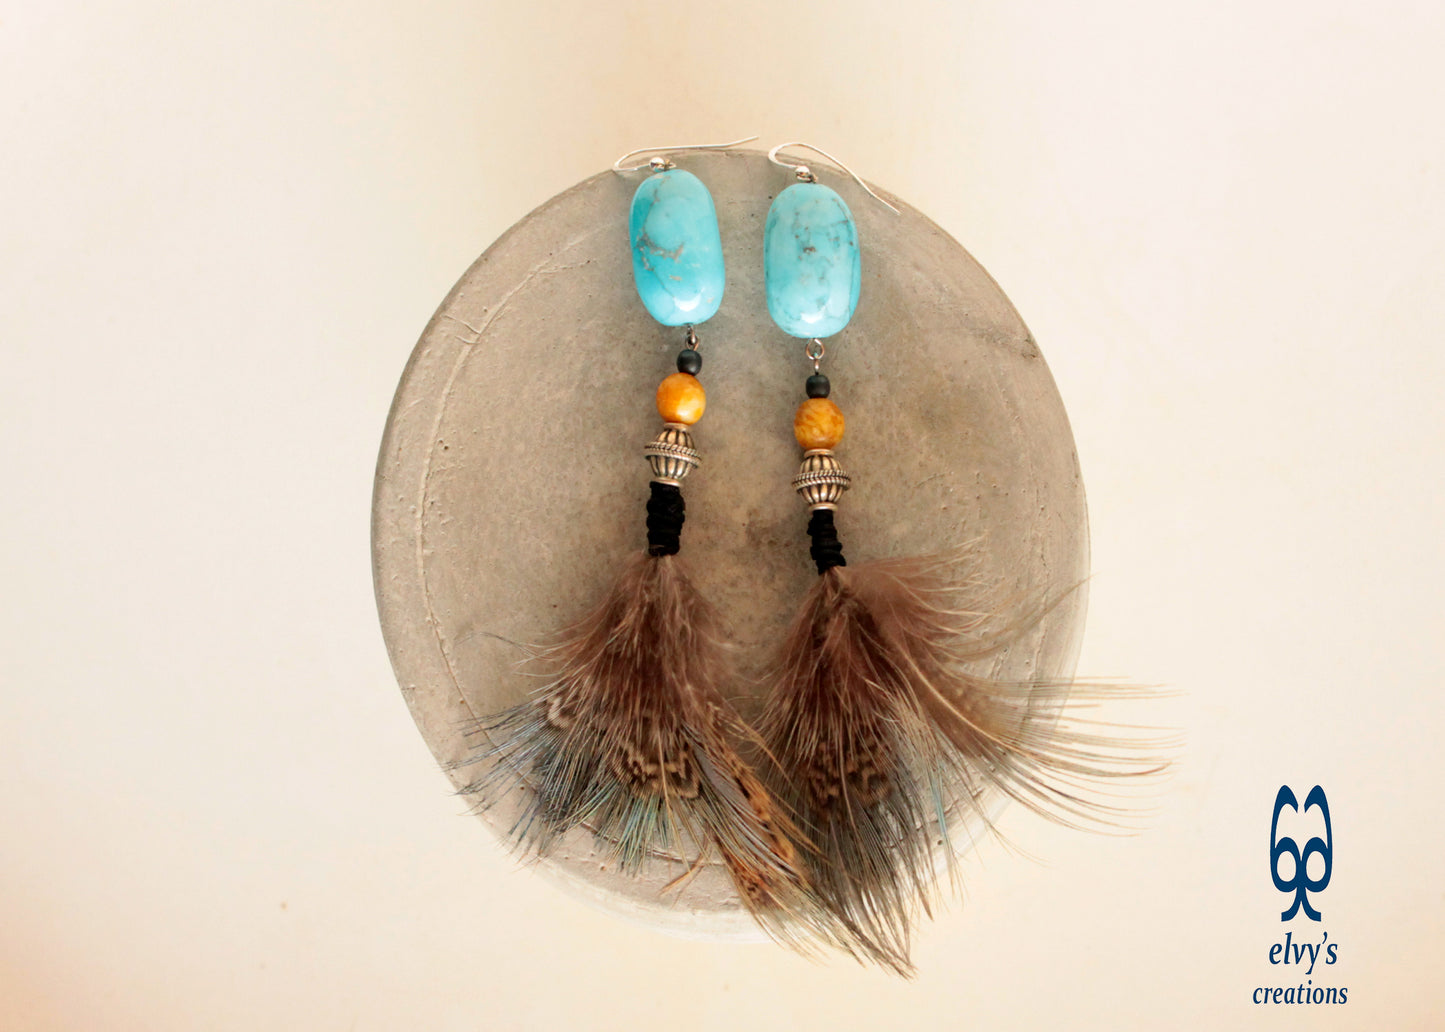 Turquoise Howlite Earrings with yellow Agate Jewelry with Natural Peacock Feathers Boho Jewelry Gift for her